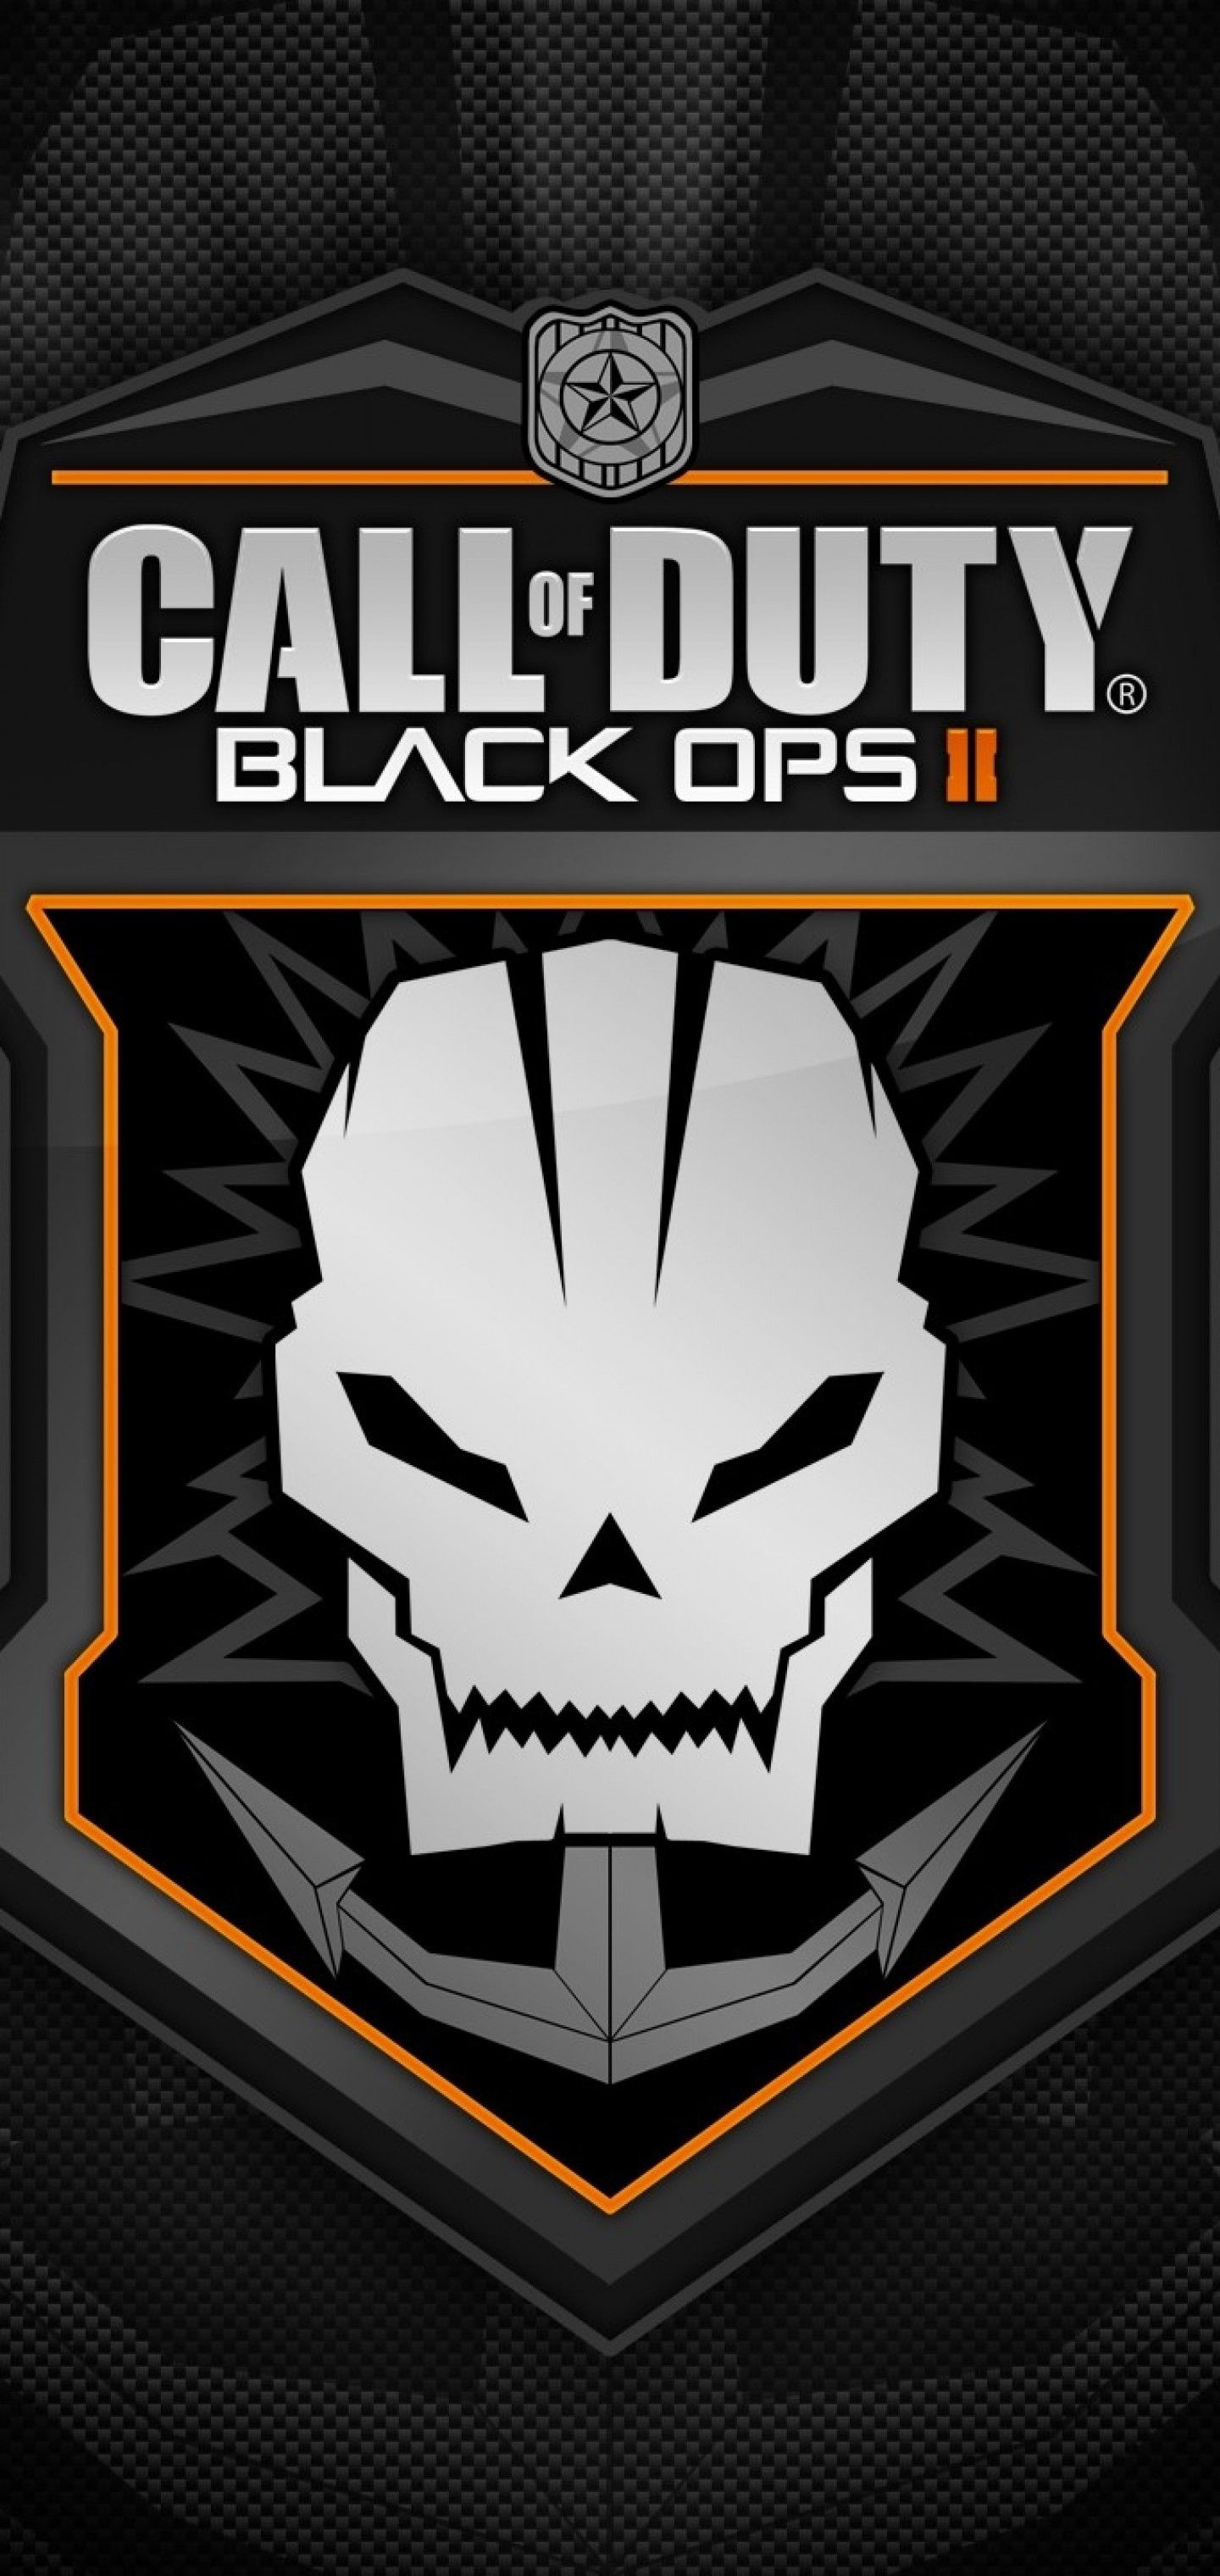 Download 1440x3040 Call Of Duty: Black Ops Logo, Skull, Cod Wallpaper for Samsung Galaxy Note Plus & S10 Plus